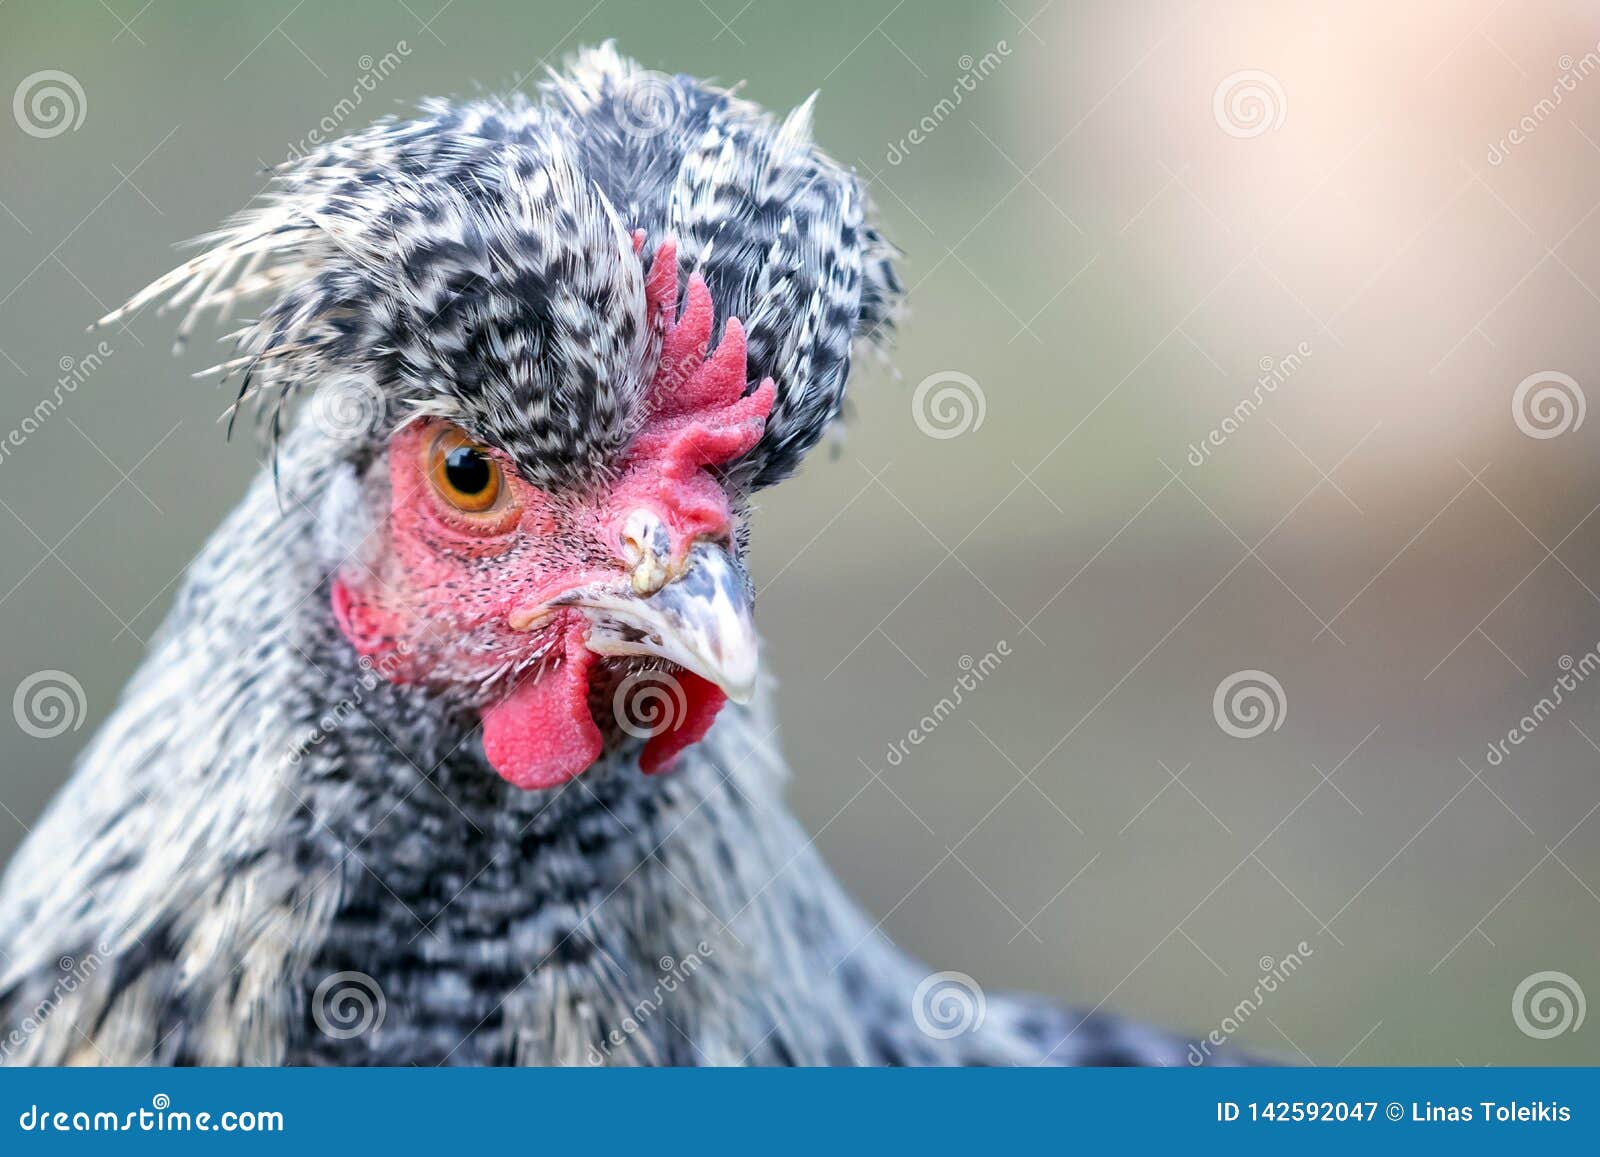 hen with big topknot in the gray background